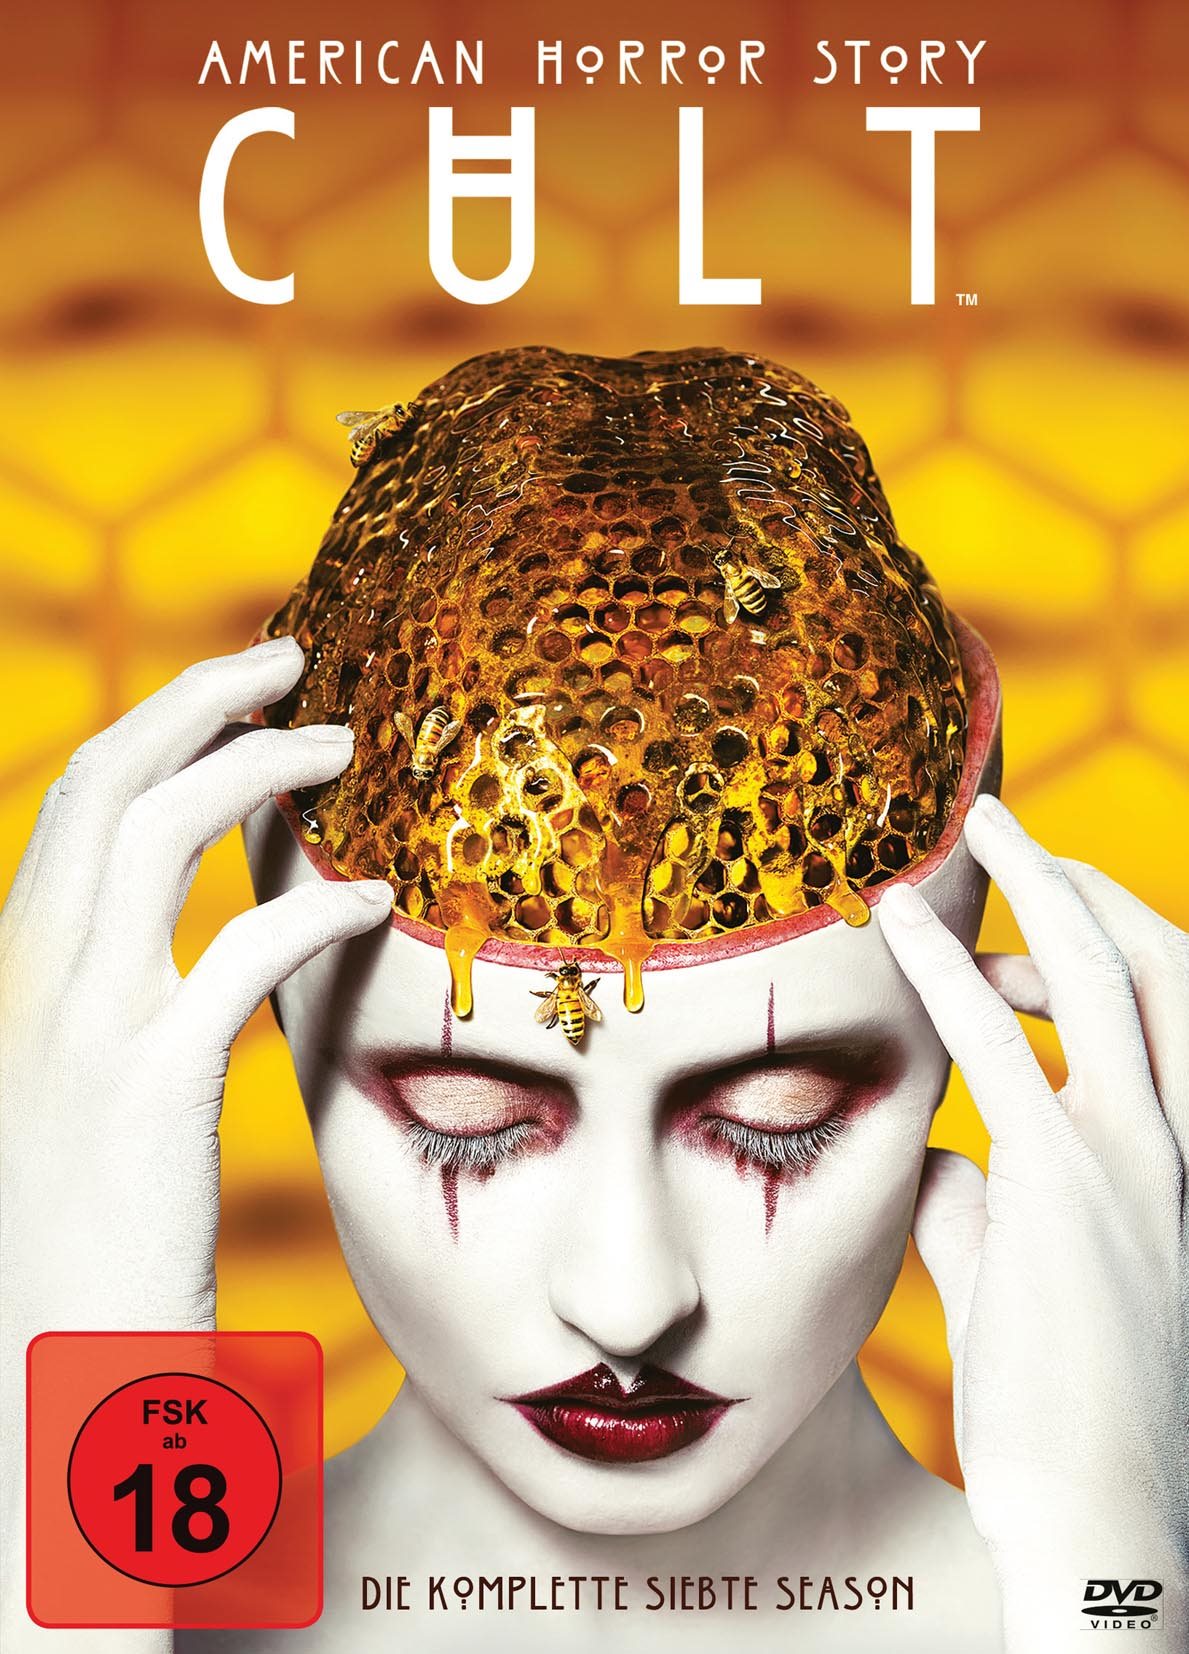 Libro_American Horror Story SSN7 - Cult Blue-Ray_€ 32,99